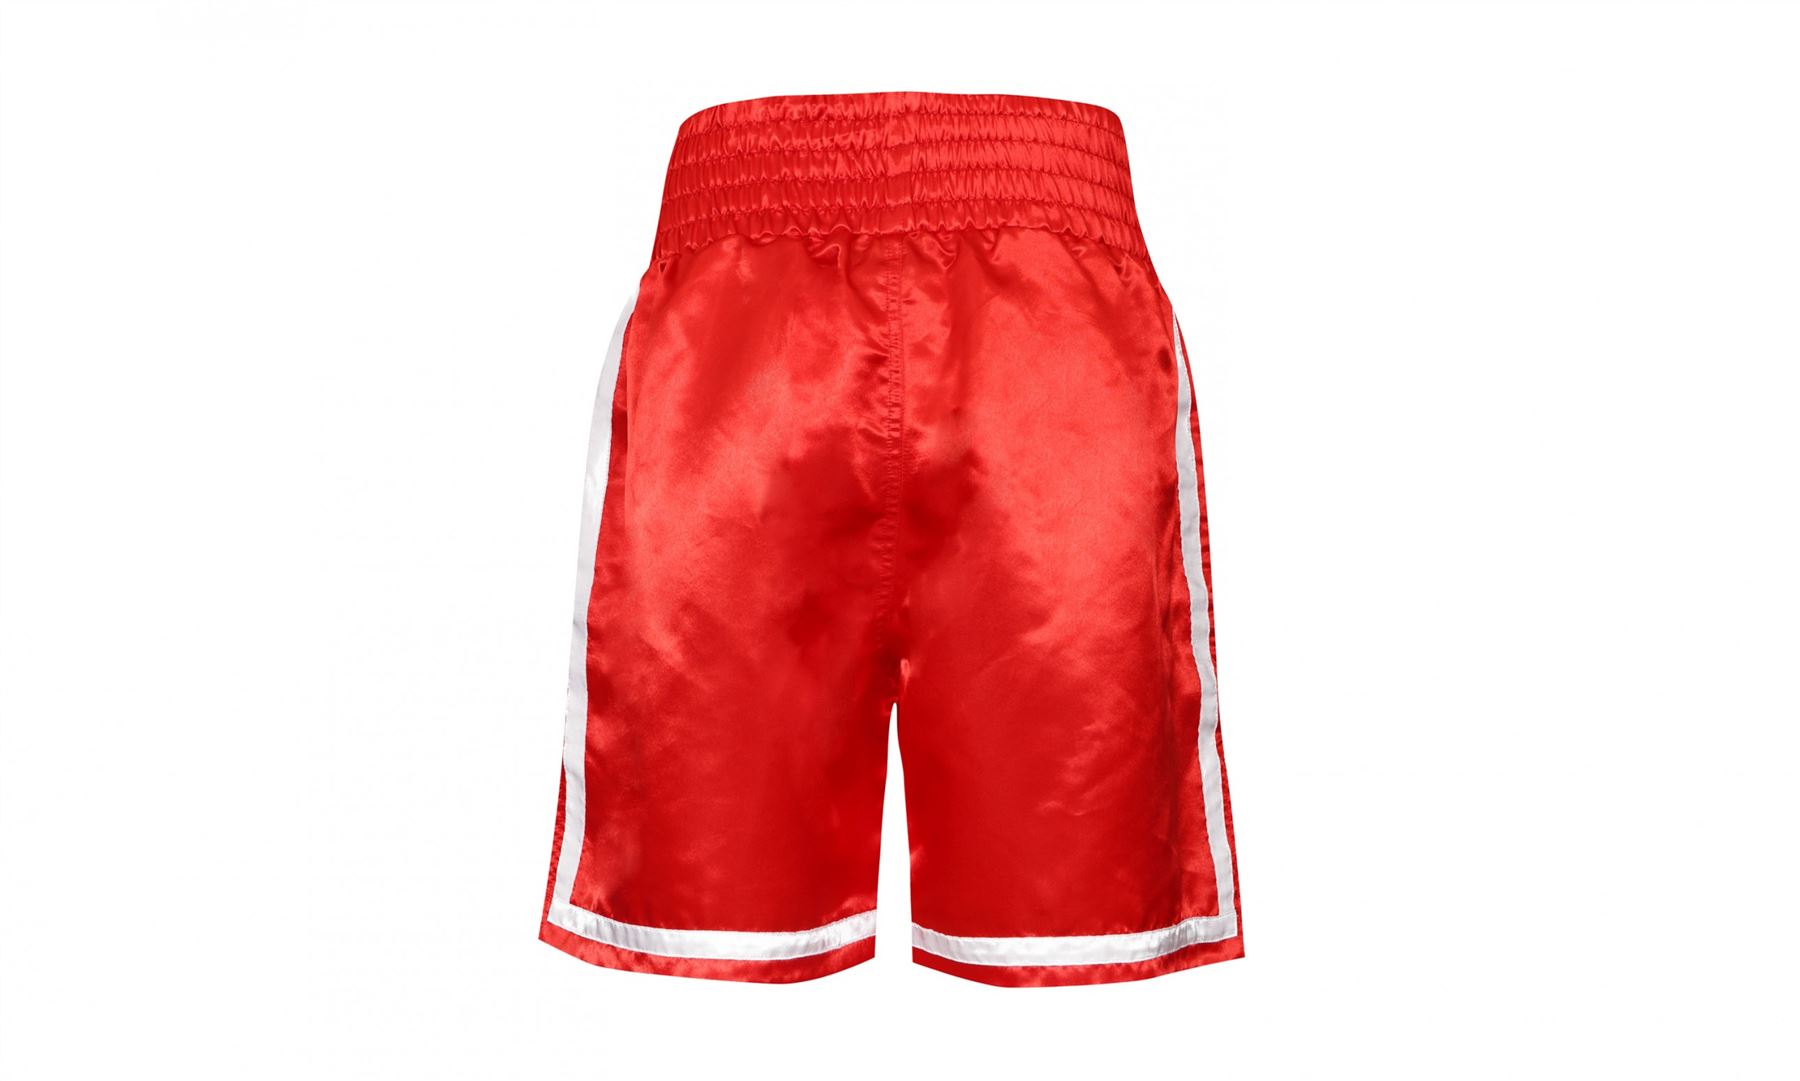 Everlast Competition Boxing Shorts